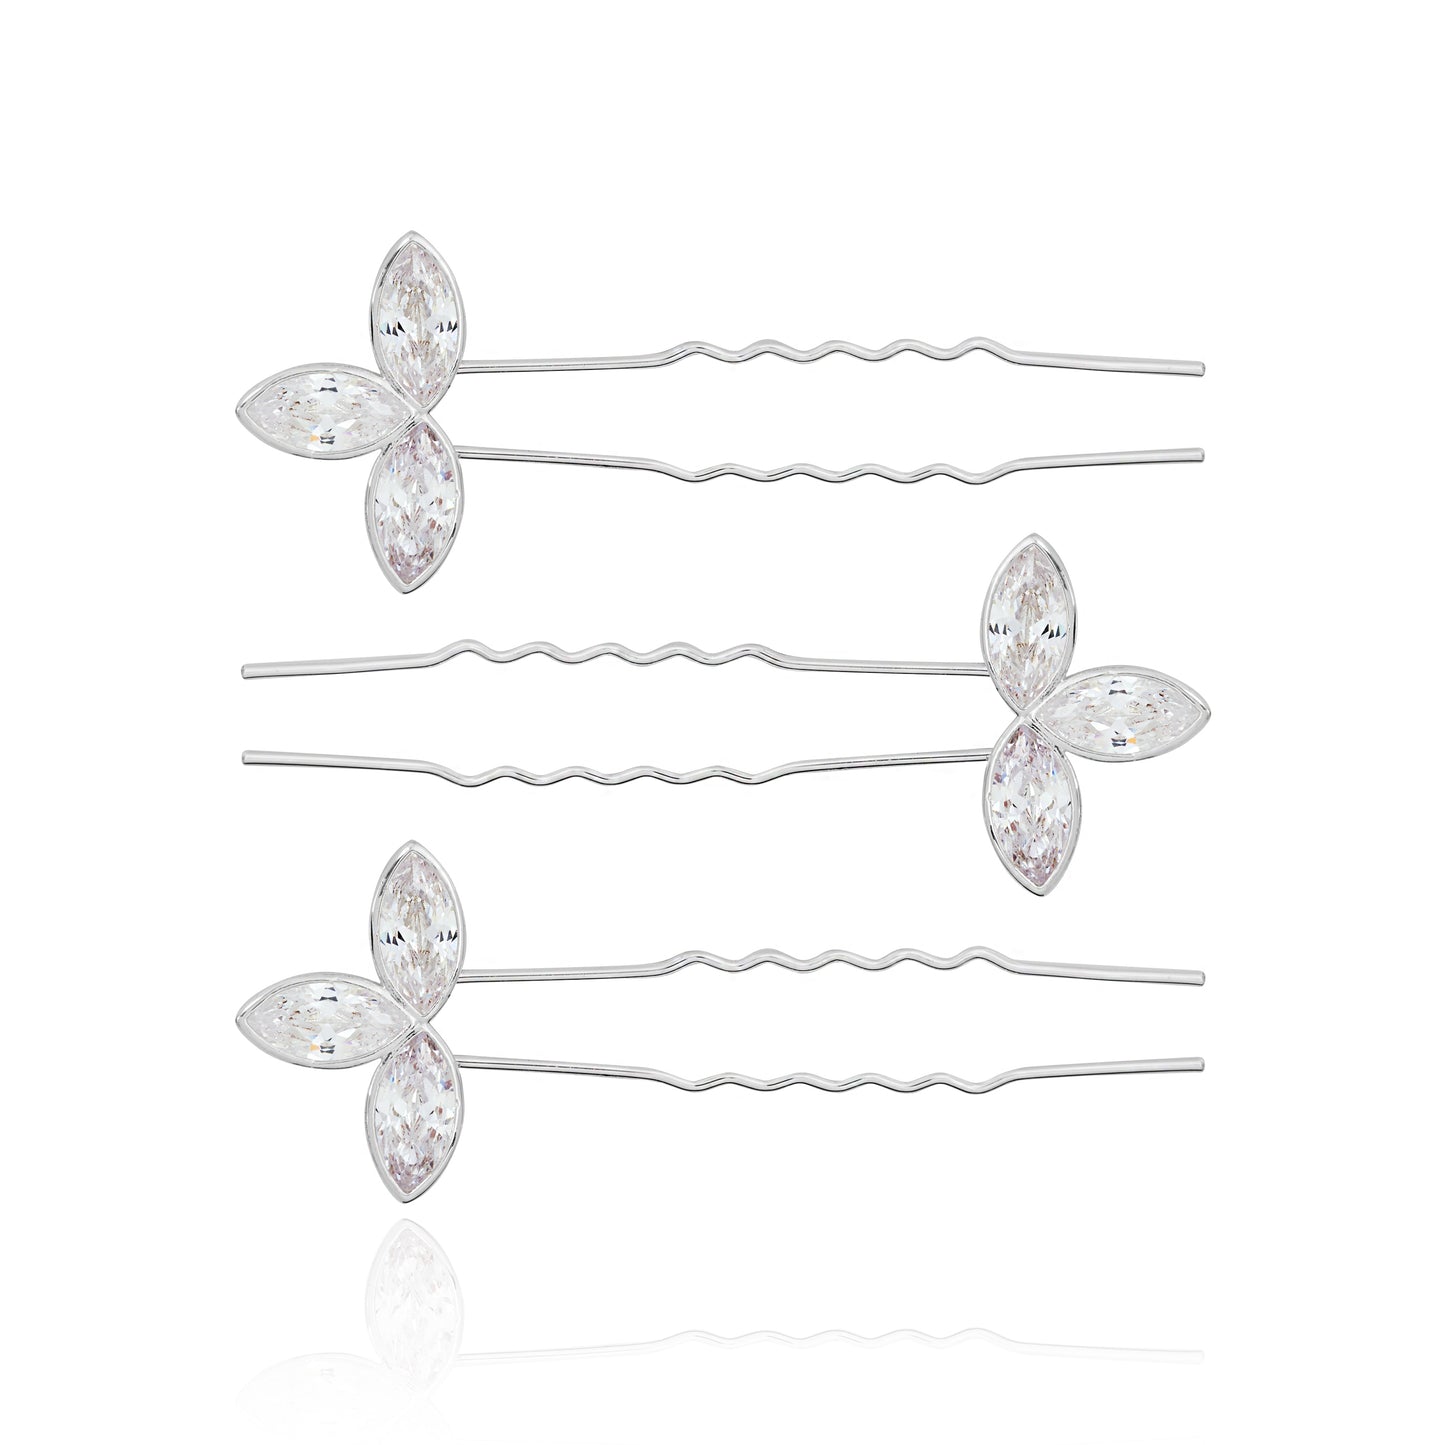 HAPPY EVER AFTER HAIR ACCESSORIES | CRYSTAL LEAF HAIR PINS